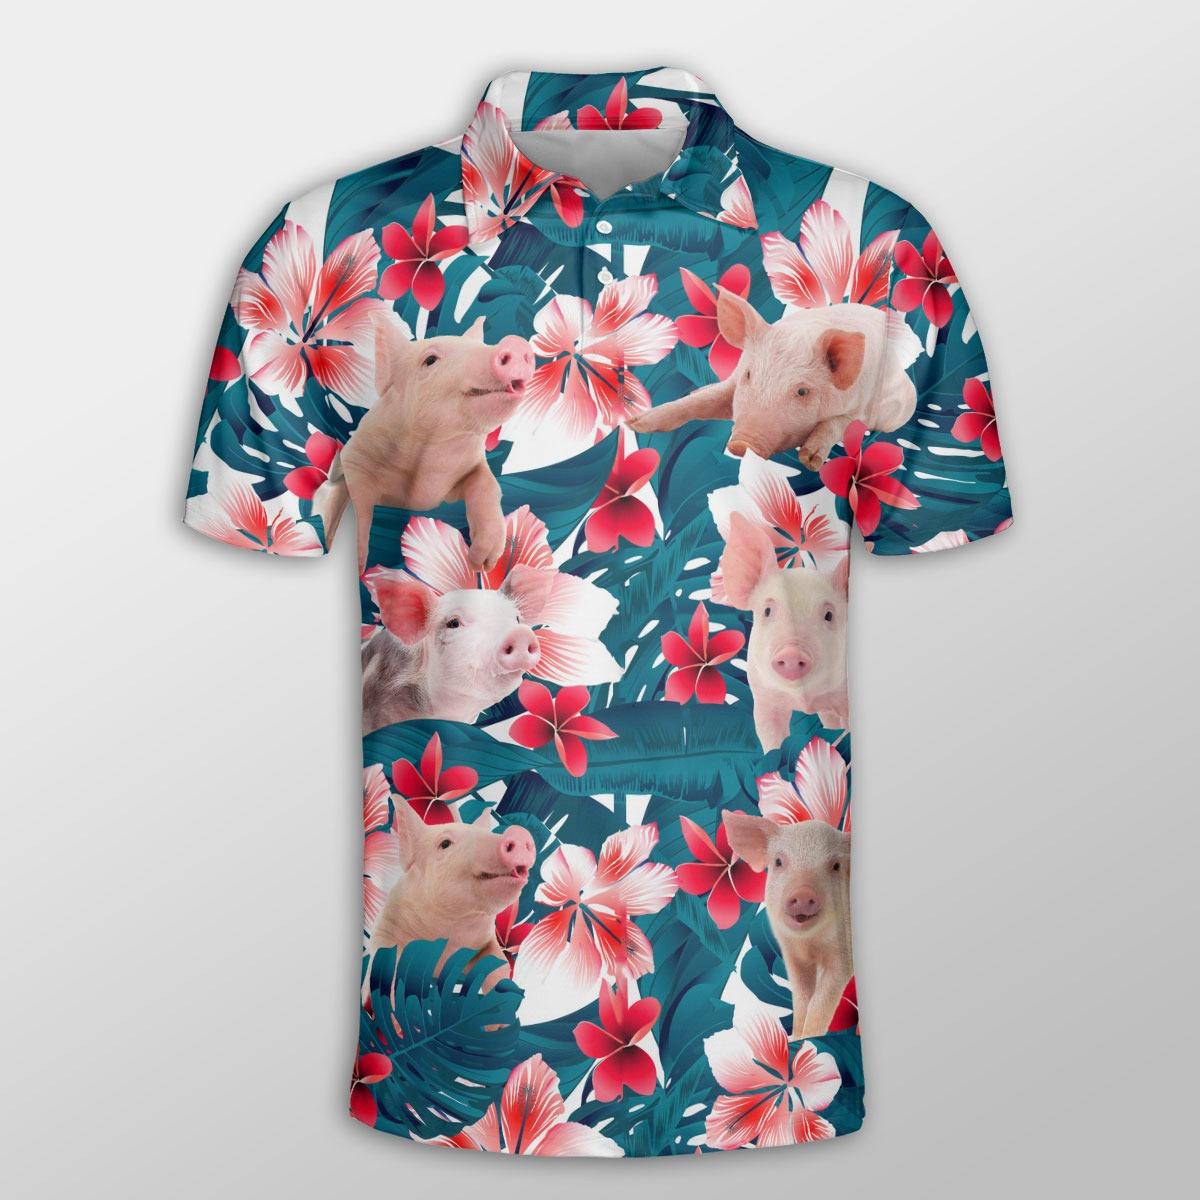 Pig Men Polo Shirt For Summer - Pig Tropical Floral Pattern Farm Lovers Button Shirt For Men - Perfect Gift For Pig Lovers, Cattle Lovers - Amzanimalsgift